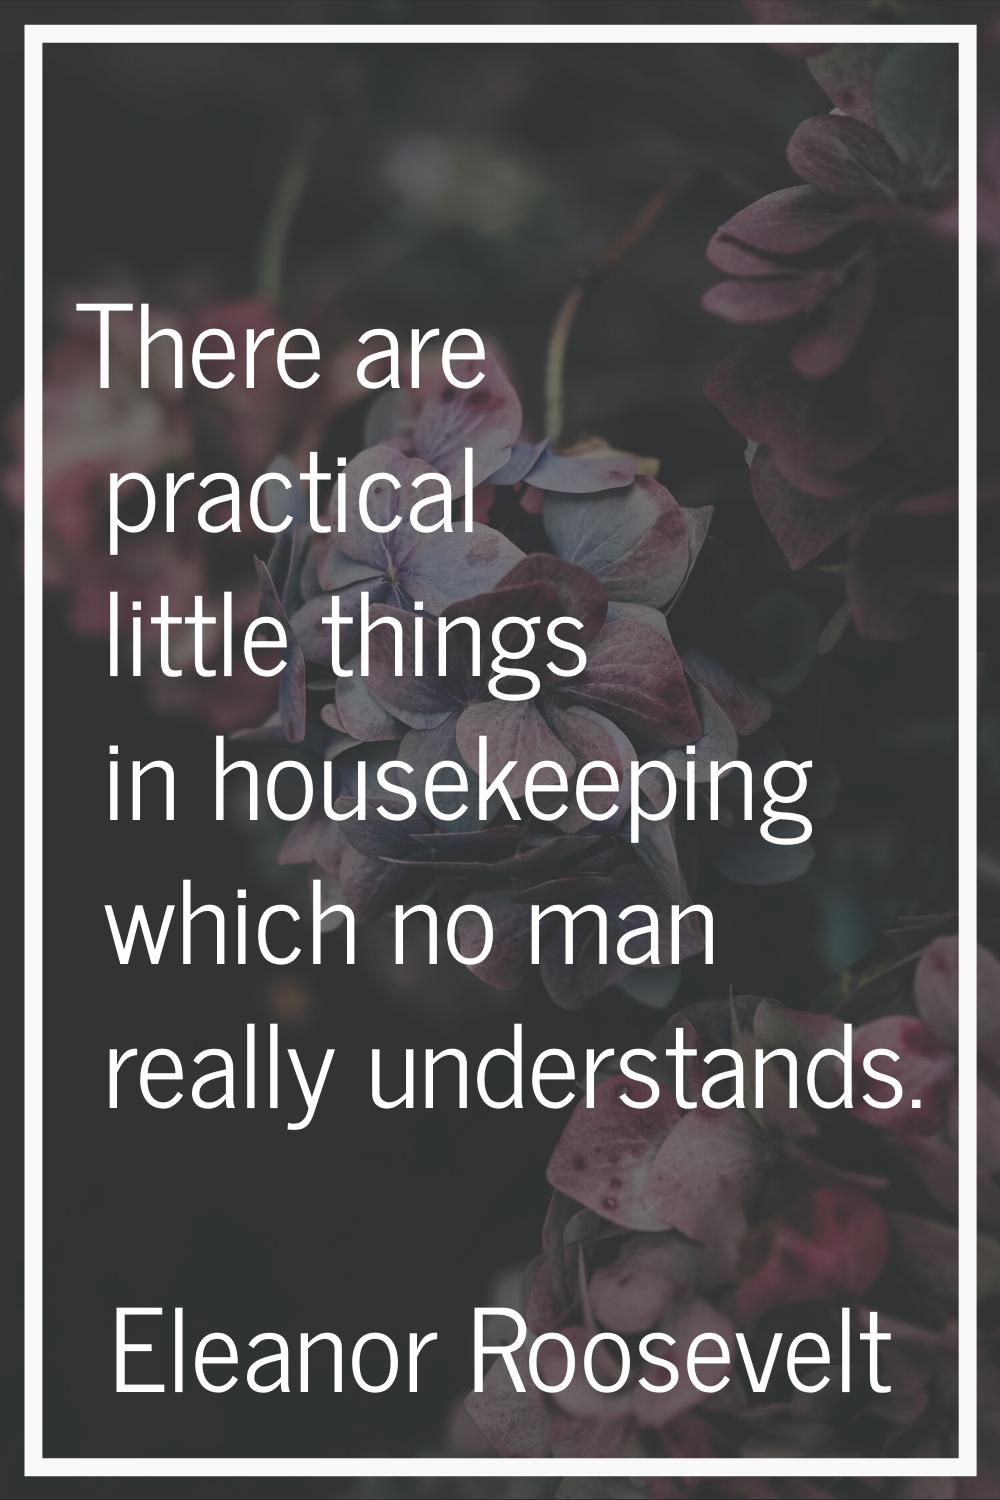 There are practical little things in housekeeping which no man really understands.